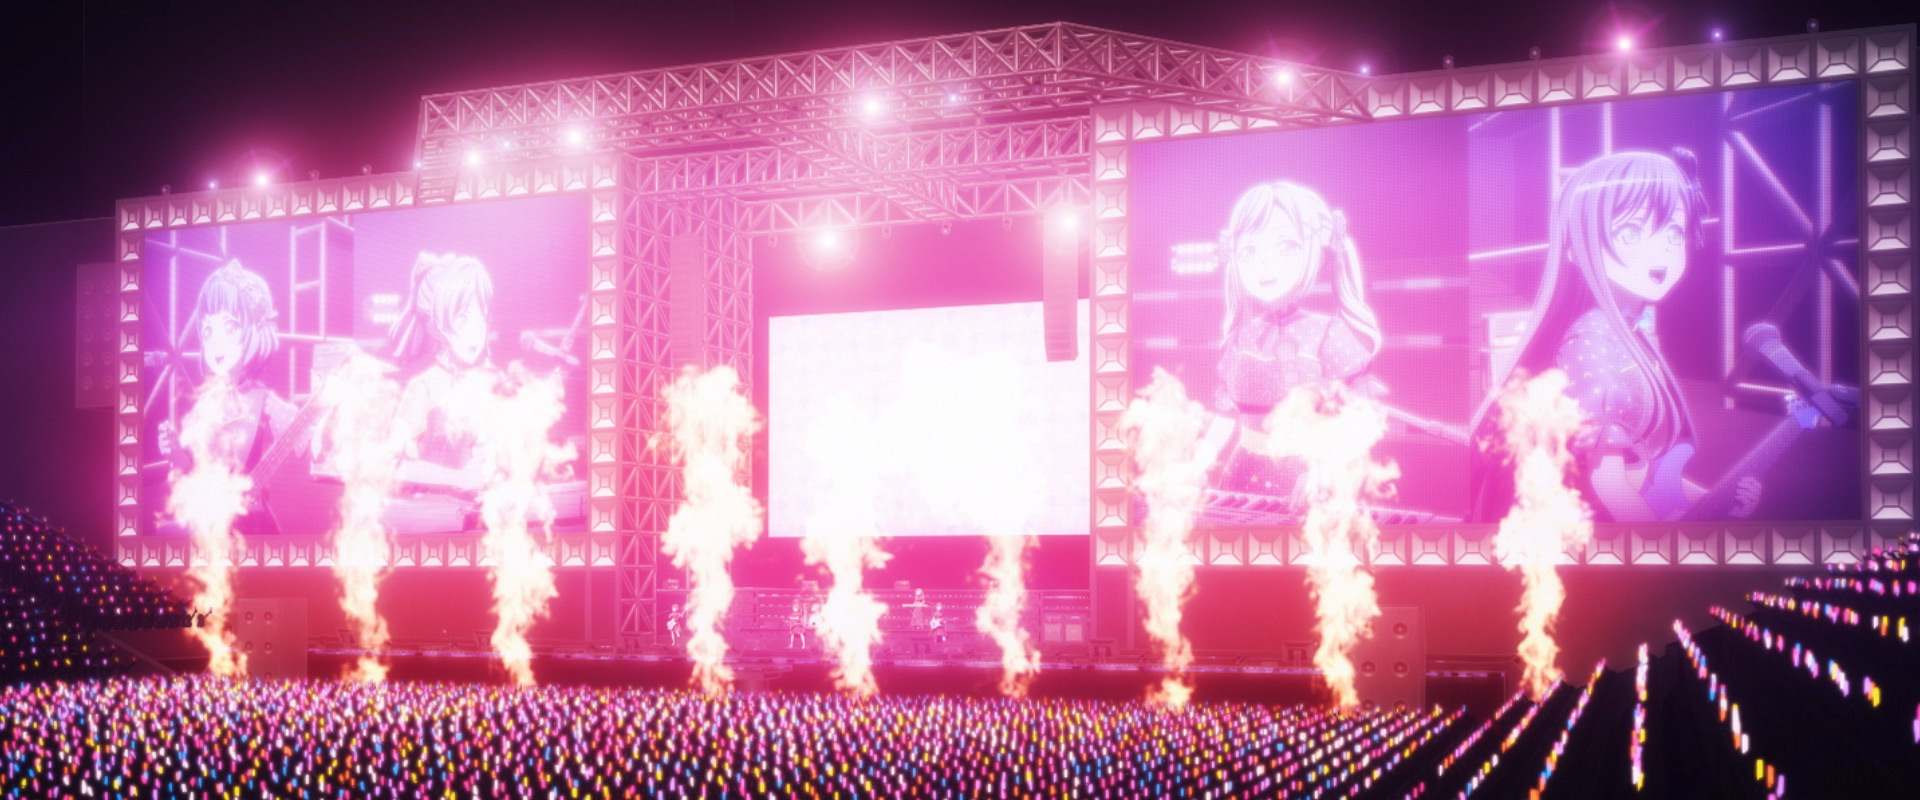 BanG Dream! FILM LIVE 2nd Stage background 1